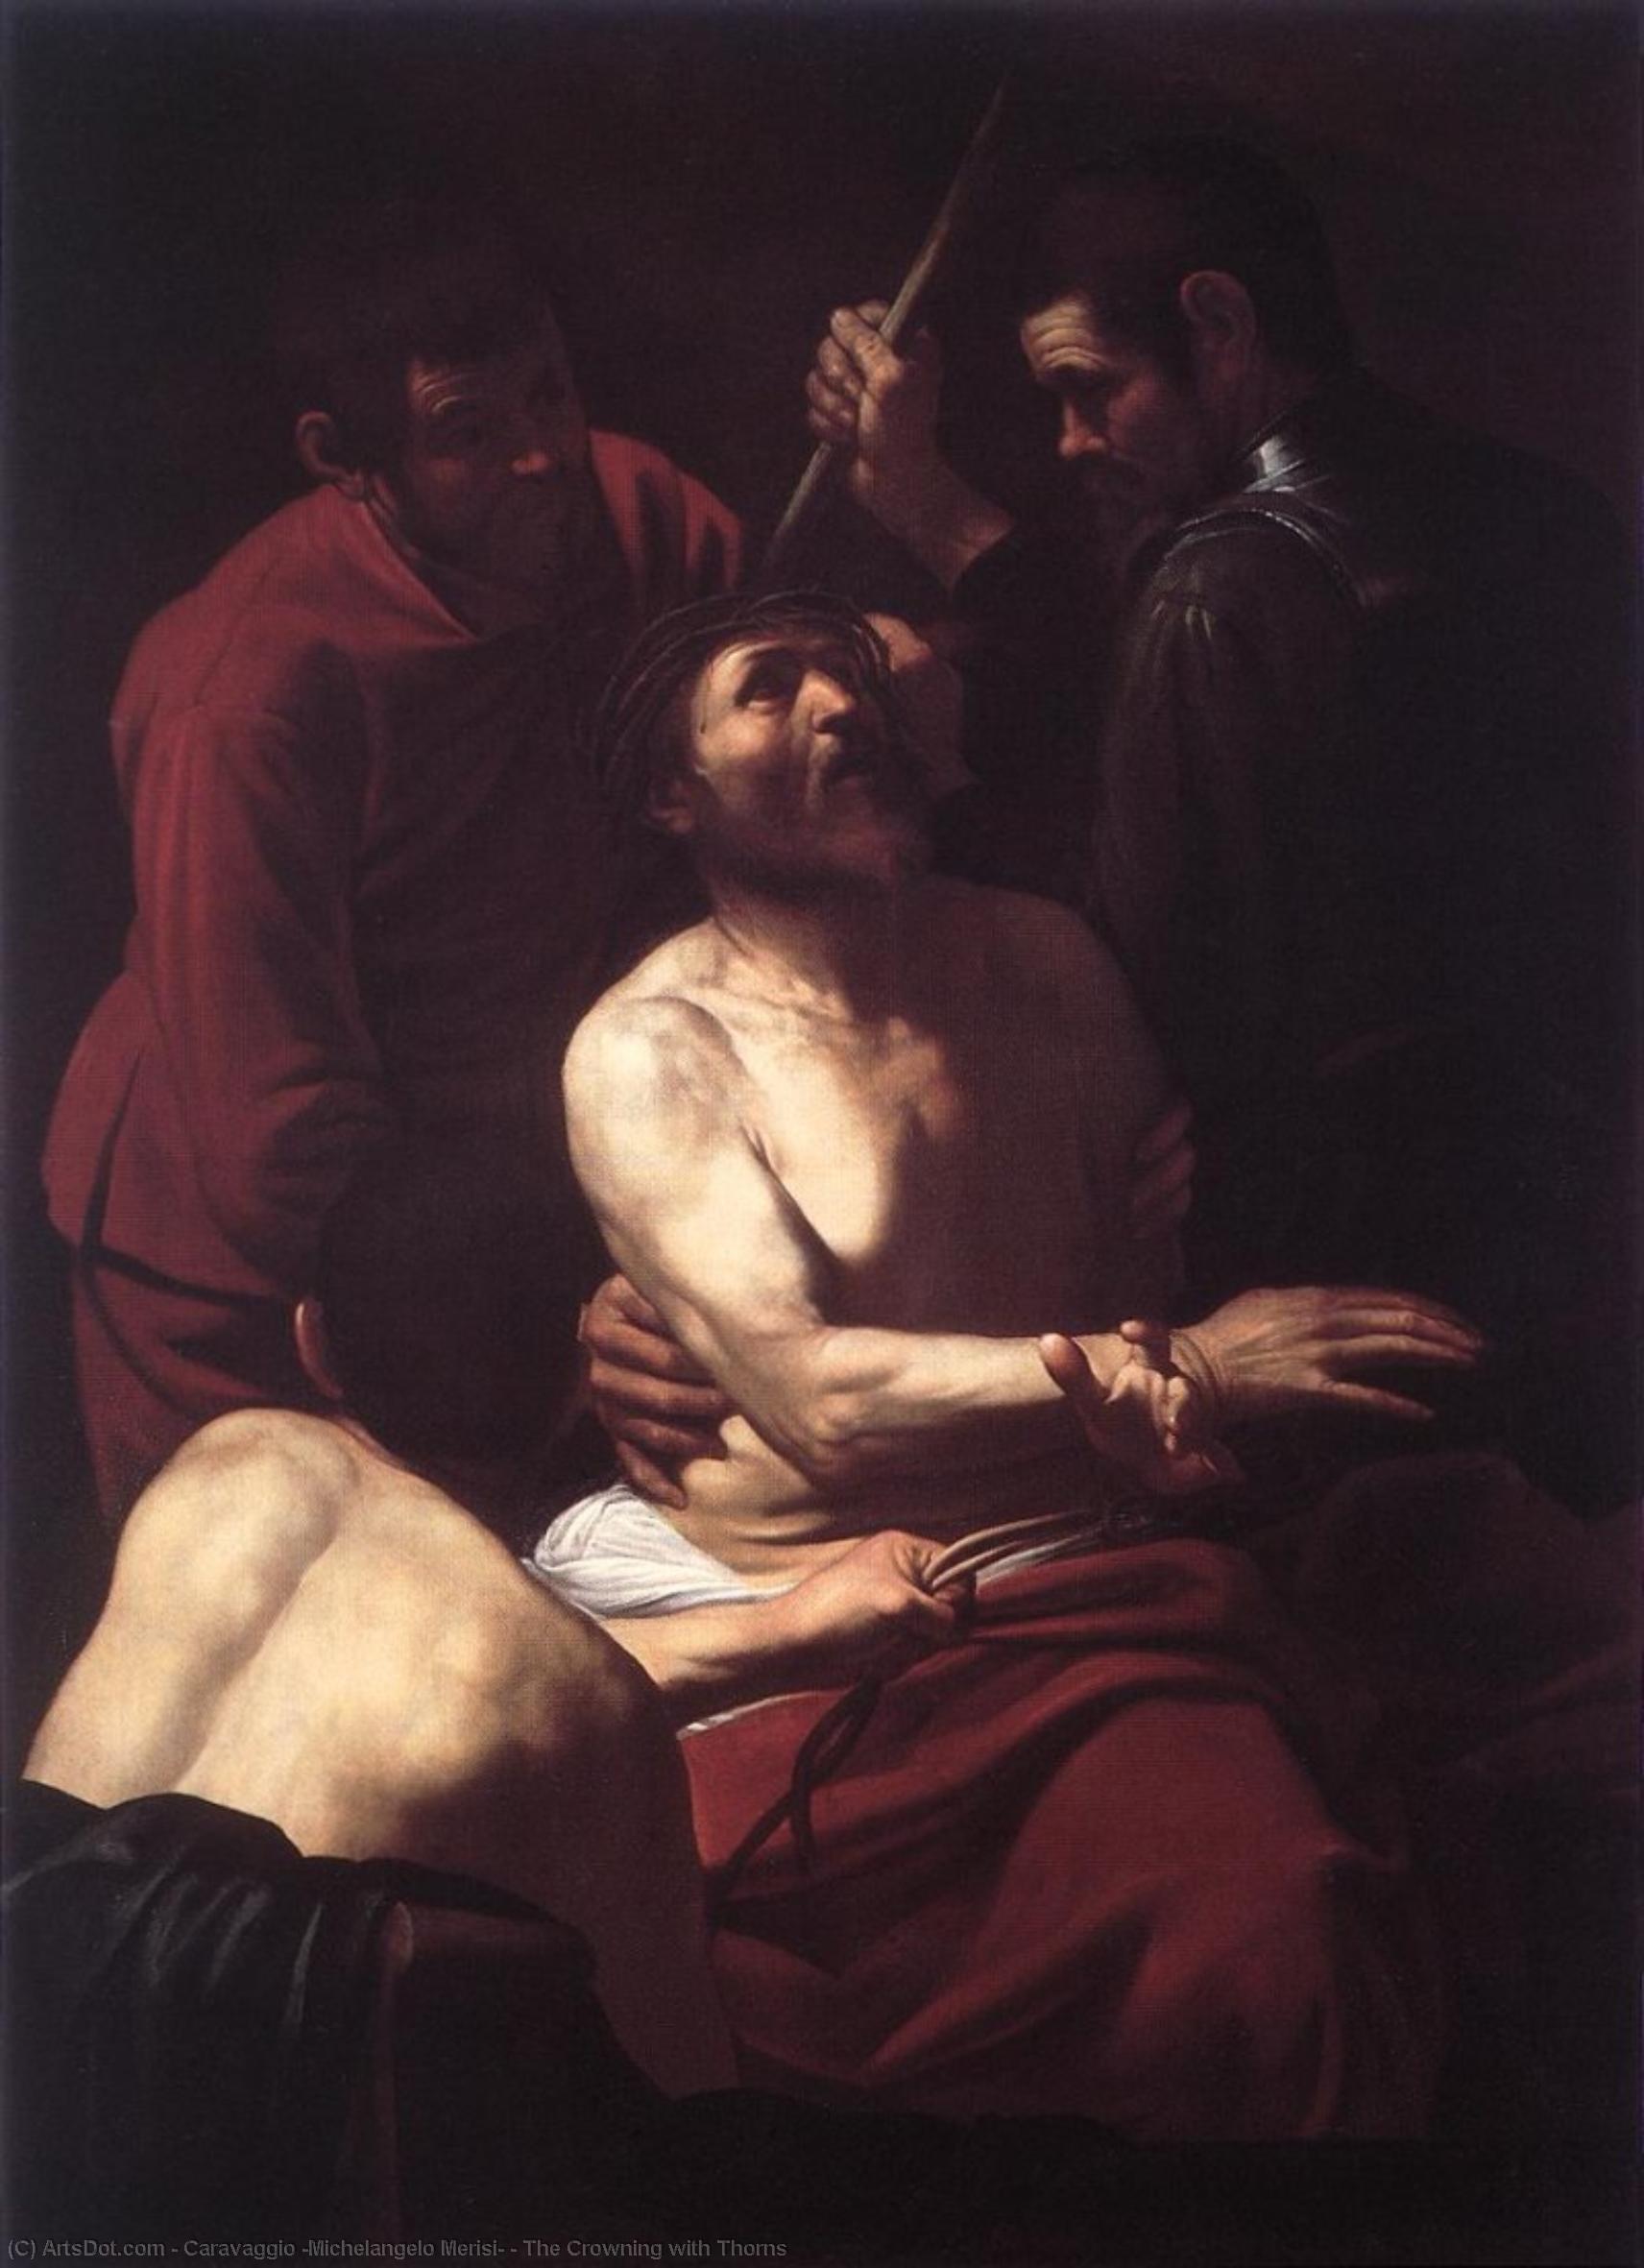 WikiOO.org - 백과 사전 - 회화, 삽화 Caravaggio (Michelangelo Merisi) - The Crowning with Thorns